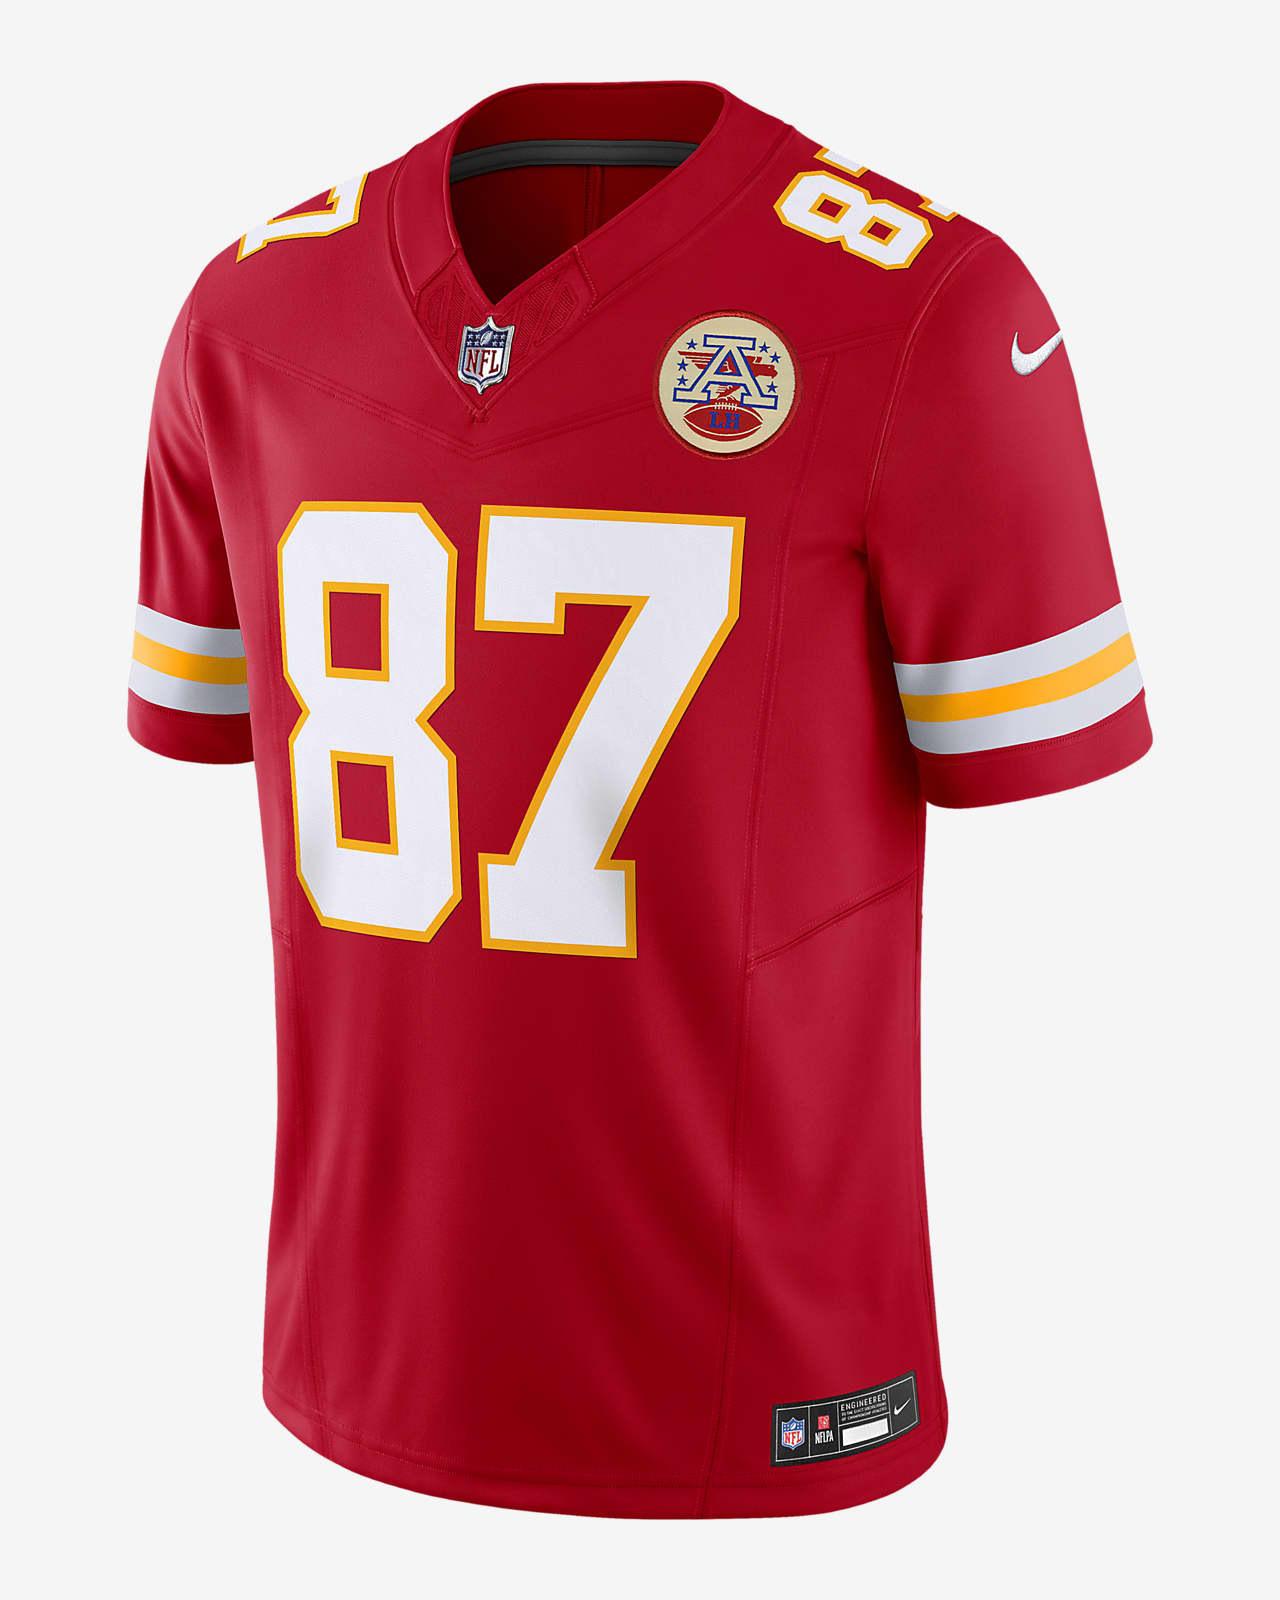 NFL Shop Jersey Buying, Sizing Guide